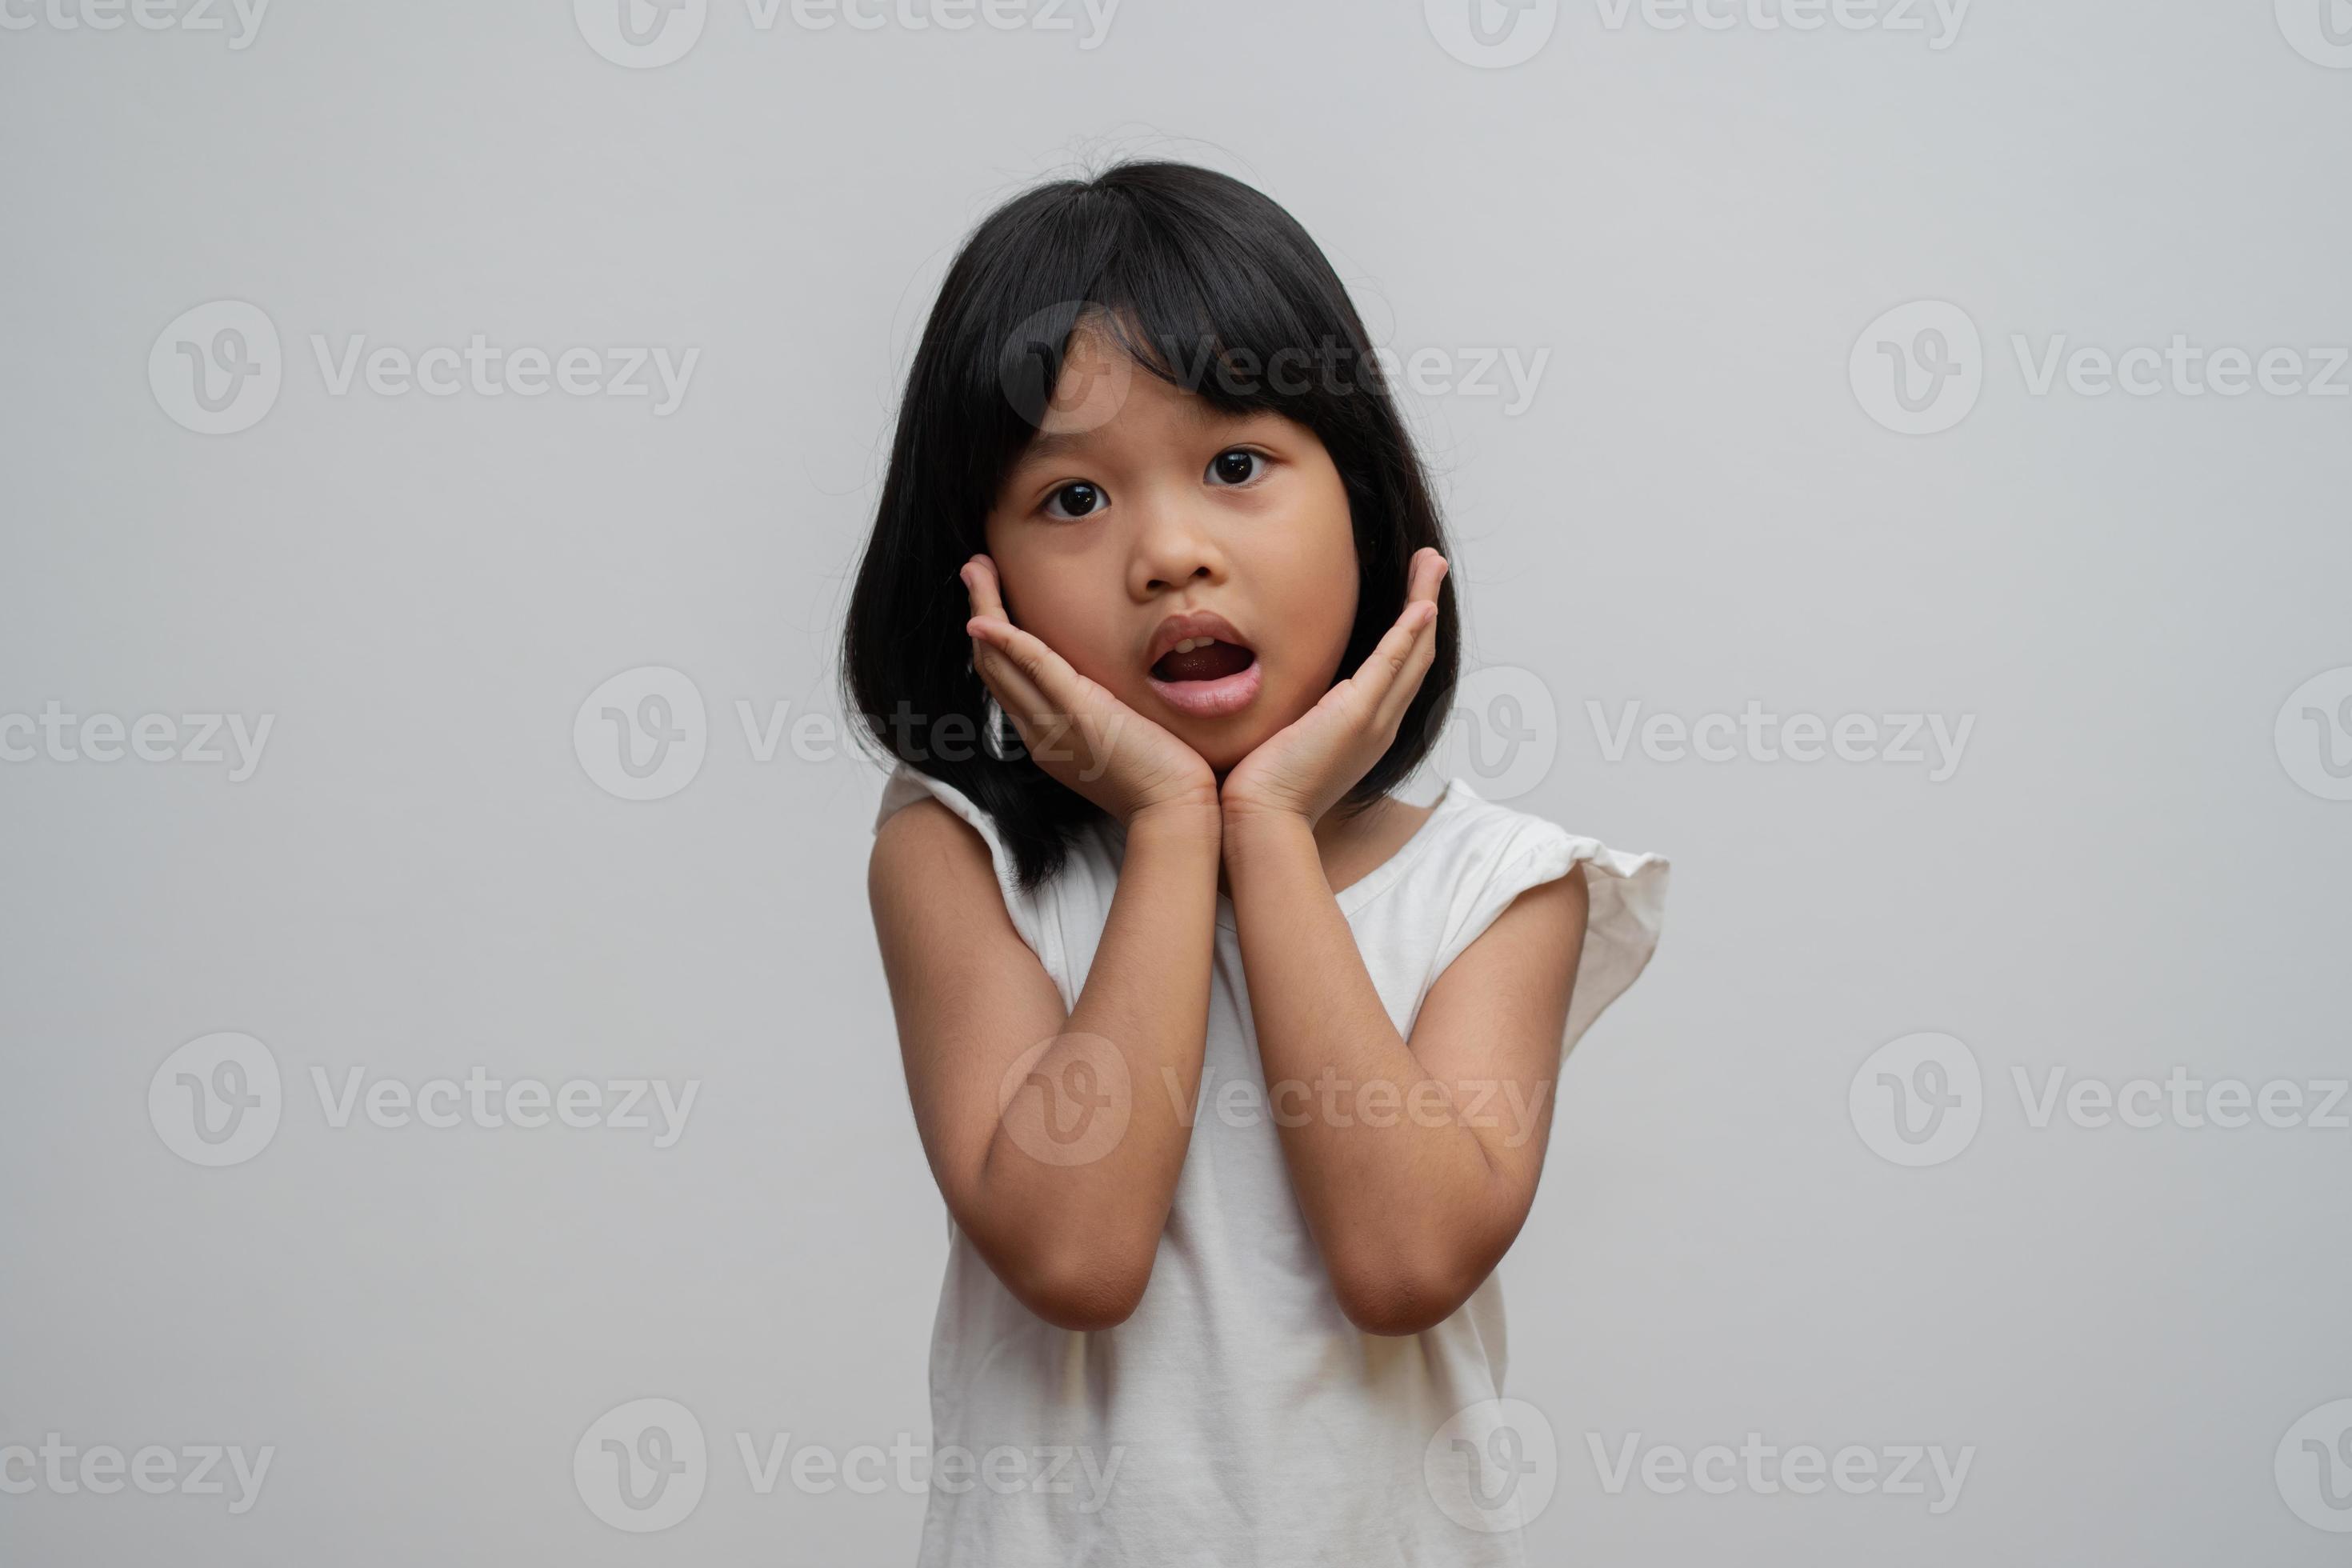 portrait-of-asian-child-5-year-old-and-to-collect-hair-and-place-her-hands-on-her-chin-and-make-thinking-pose-on-isolated-white-background-she-is-happiness-radiance-in-youth-education-concept-photo.jpg